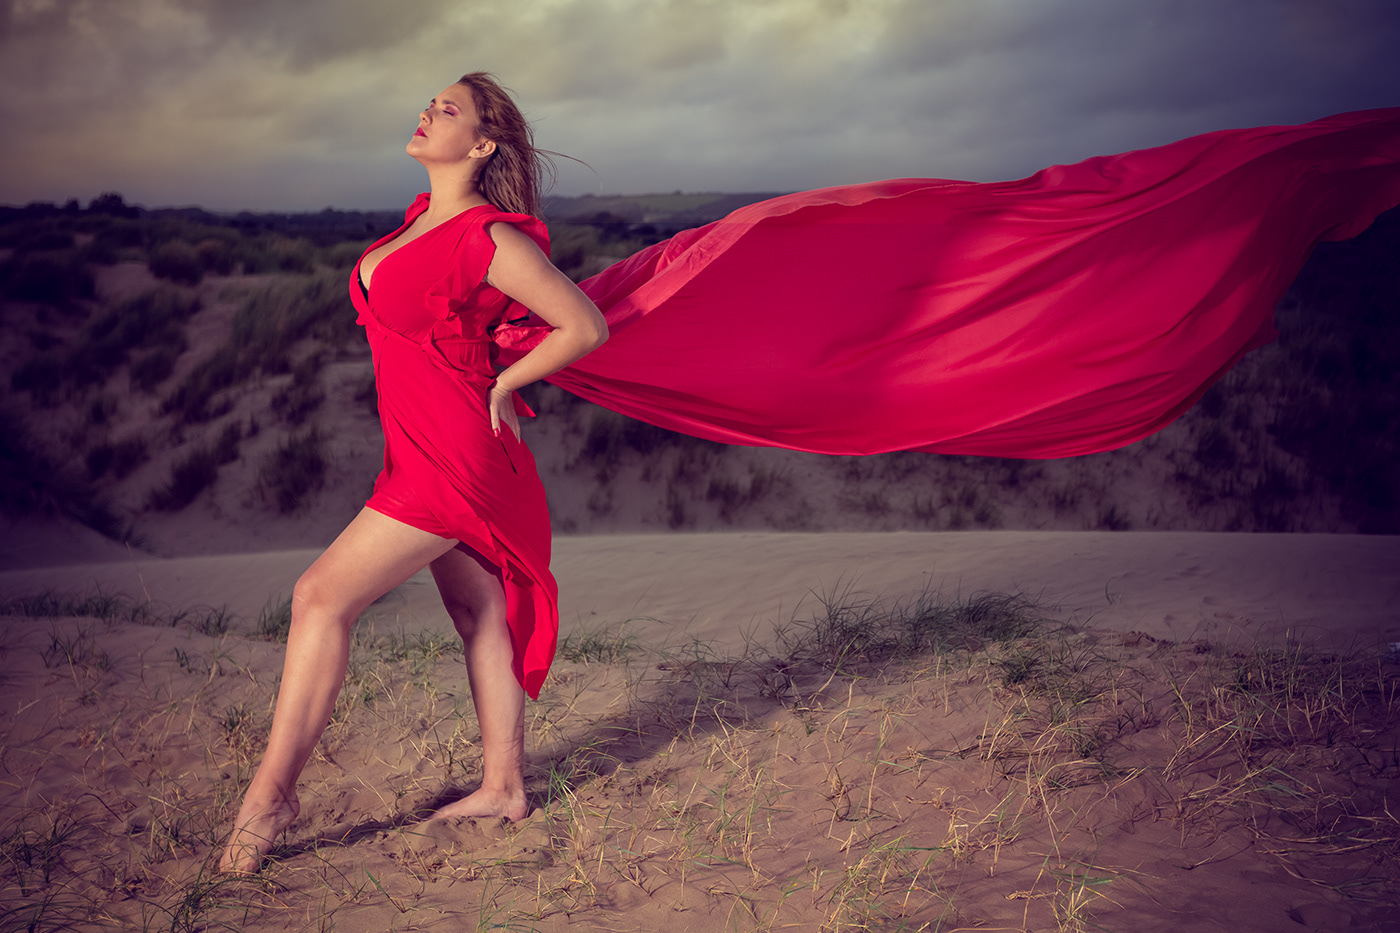 An all red fashion model photo shoot  with a dress blowing in the wind